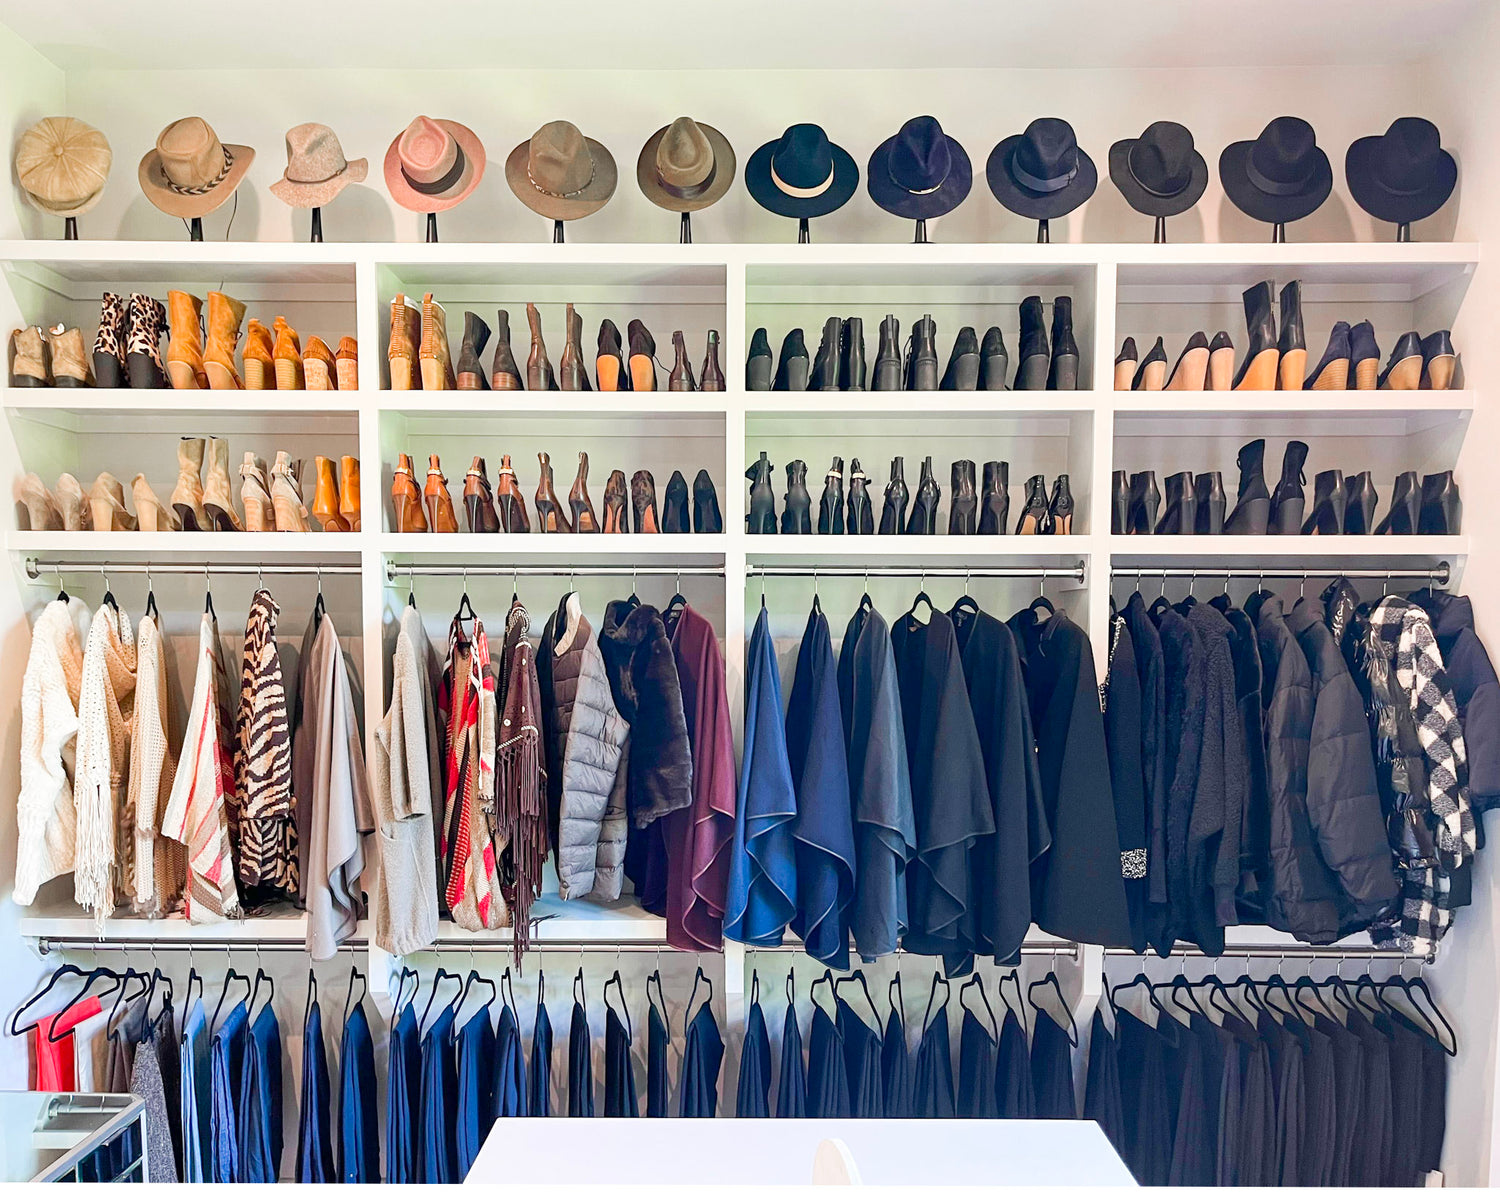 5 Simple Steps to Winter Clothes Storage